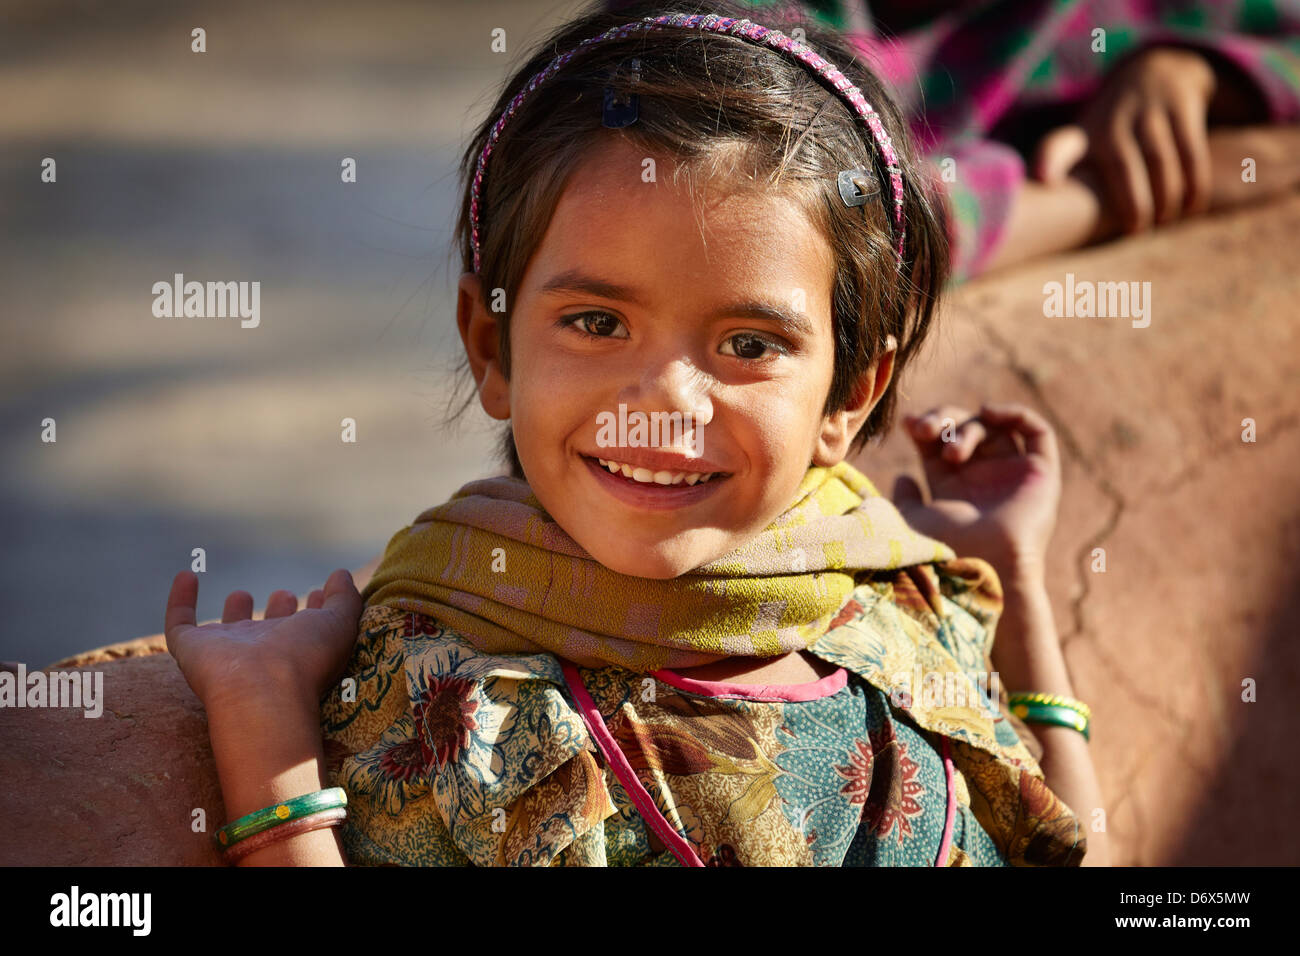 Portrait of india young smiling child girl, Rajasthan State, India Stock Photo